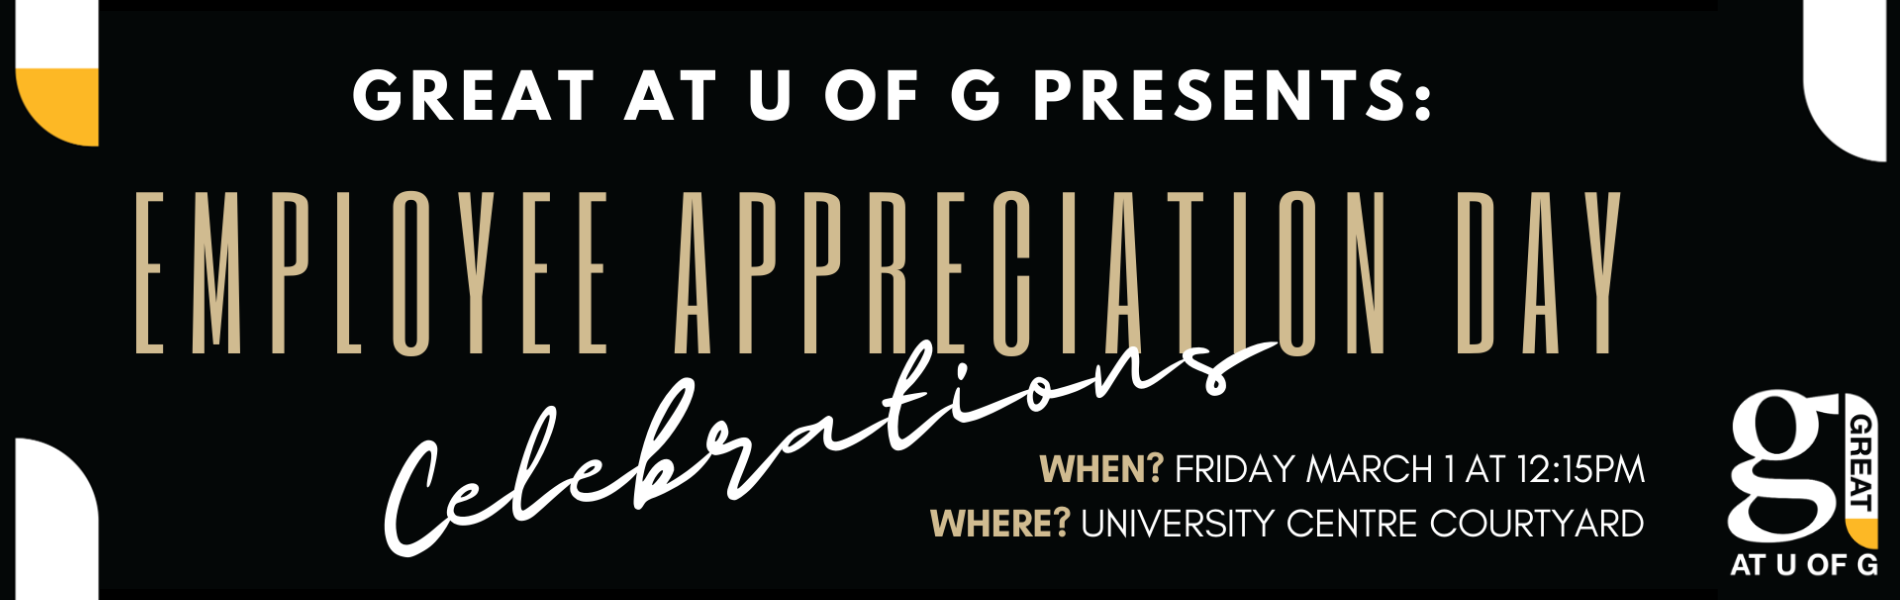 GREAT at U of G presents: Employee Appreciation Day Celebrations. When? Friday March 1 at 12:15 p.m. Where? University Centre Courtyard.